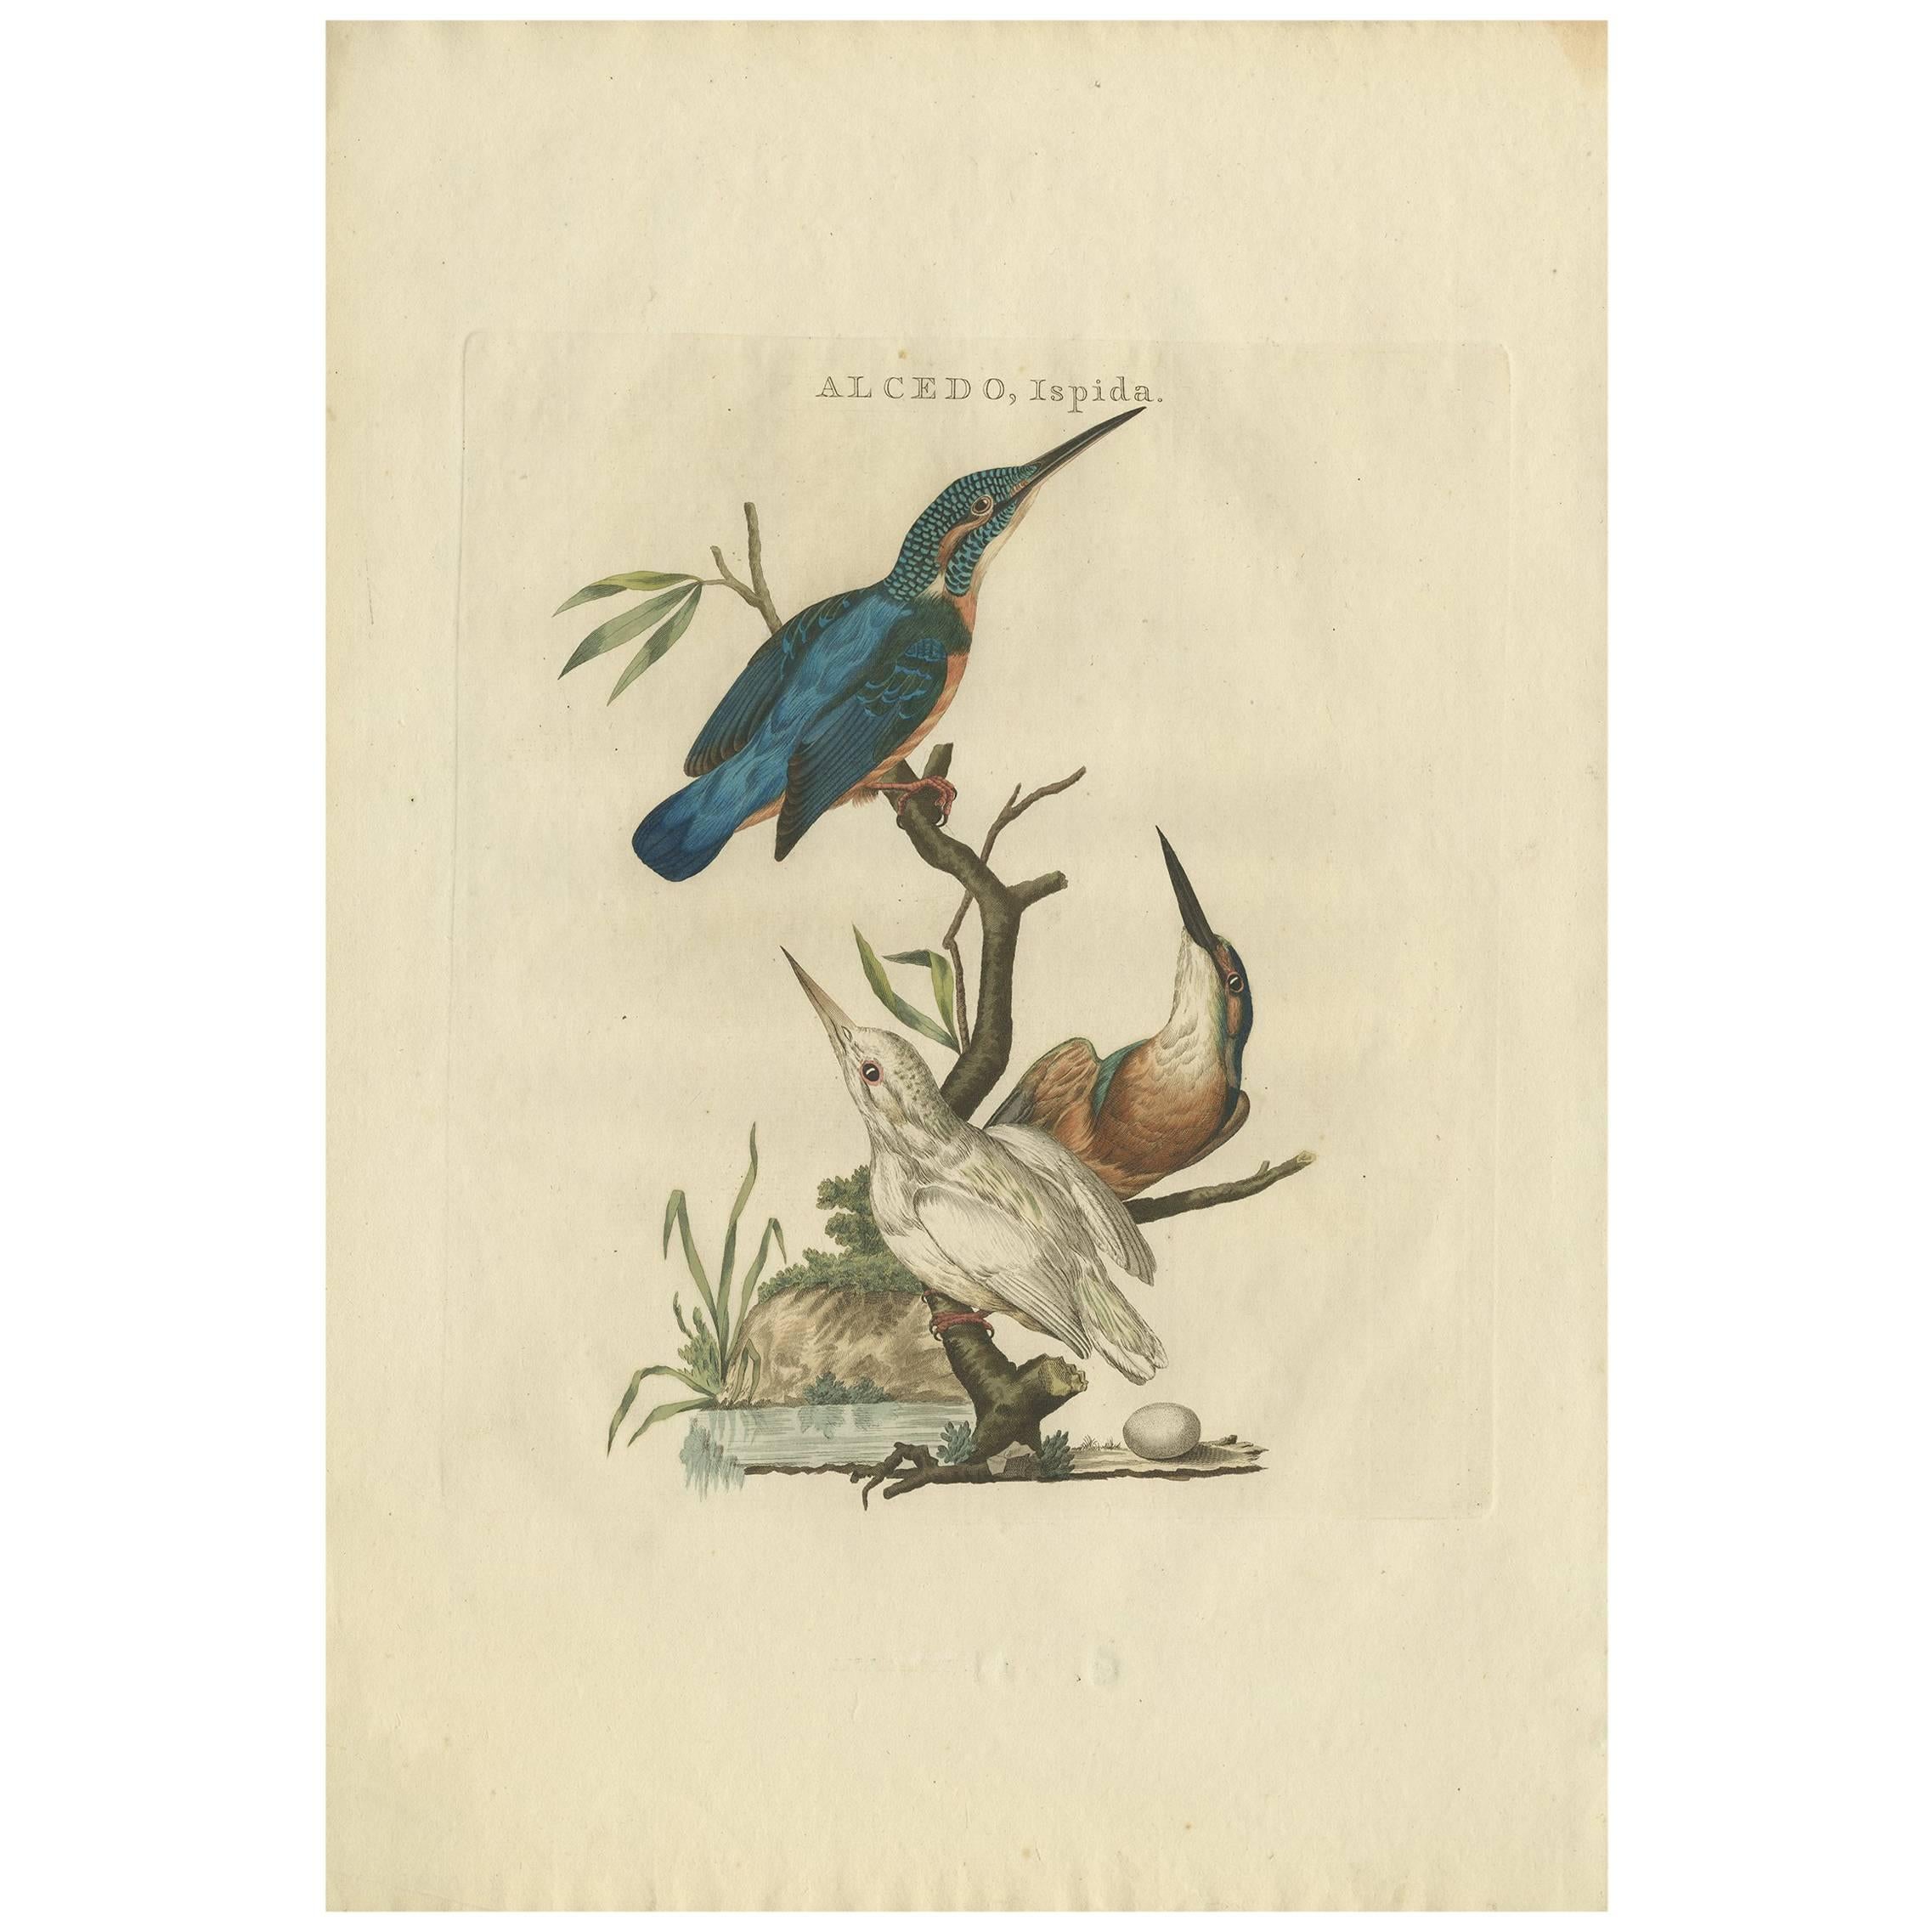 Antique Bird Print of the Common Kingfisher by Sepp & Nozeman, 1797